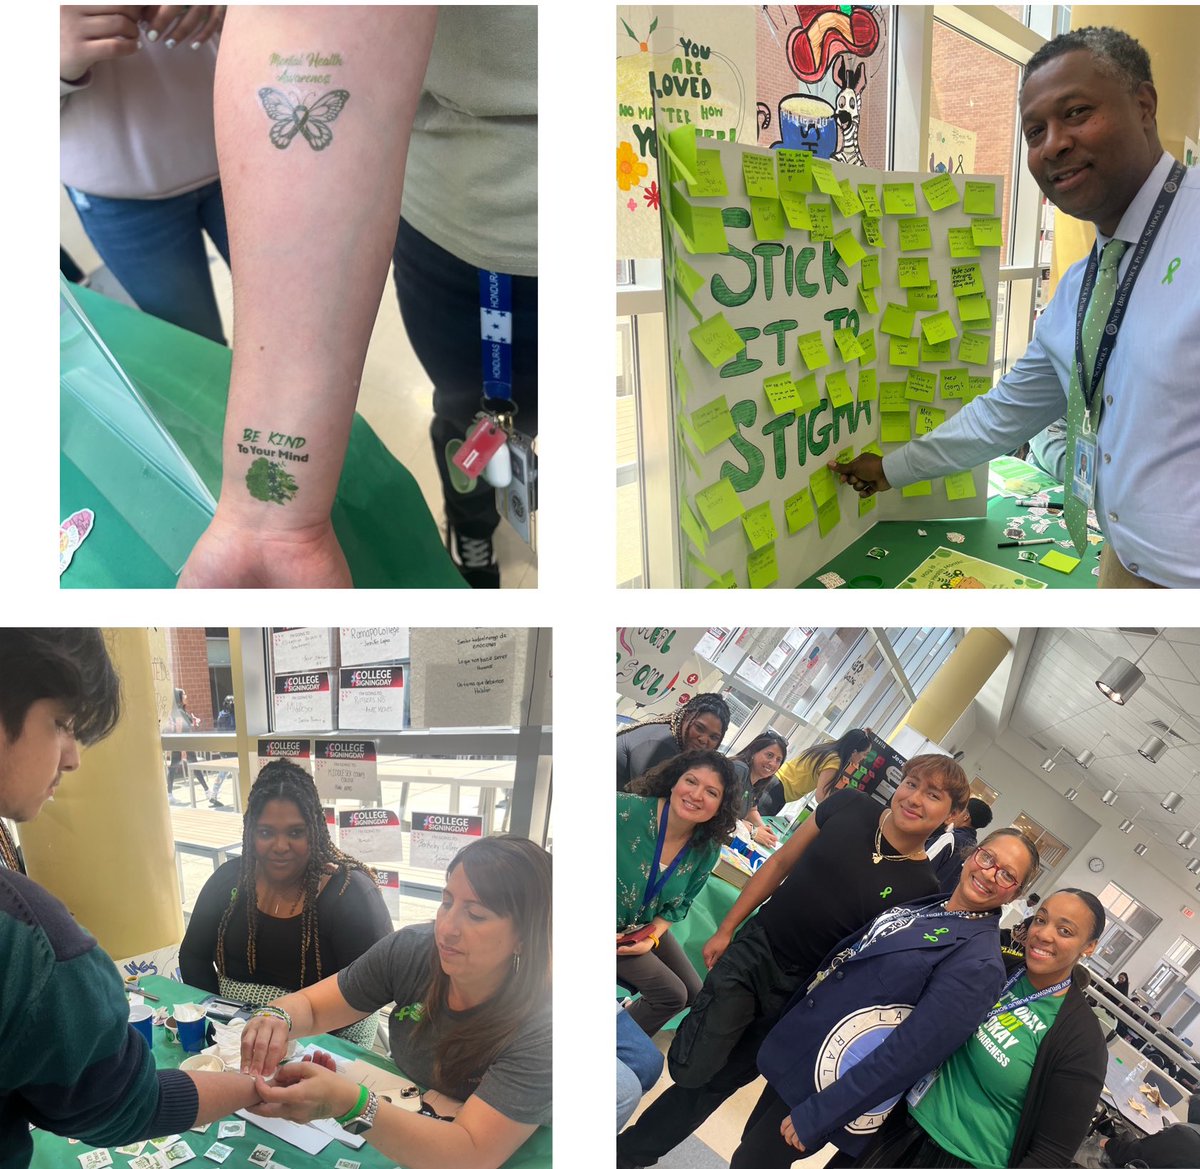 W.I.S.E. Student Voices collaborated with our Social workers, SACs & WISE team to organize an incredible Awareness Fair! During all lunch periods,a wealth of information, resources & activities were shared to promote mental health & well-being. #ALLIN4NB #NB4MH #NBPSLetsGo! 💚